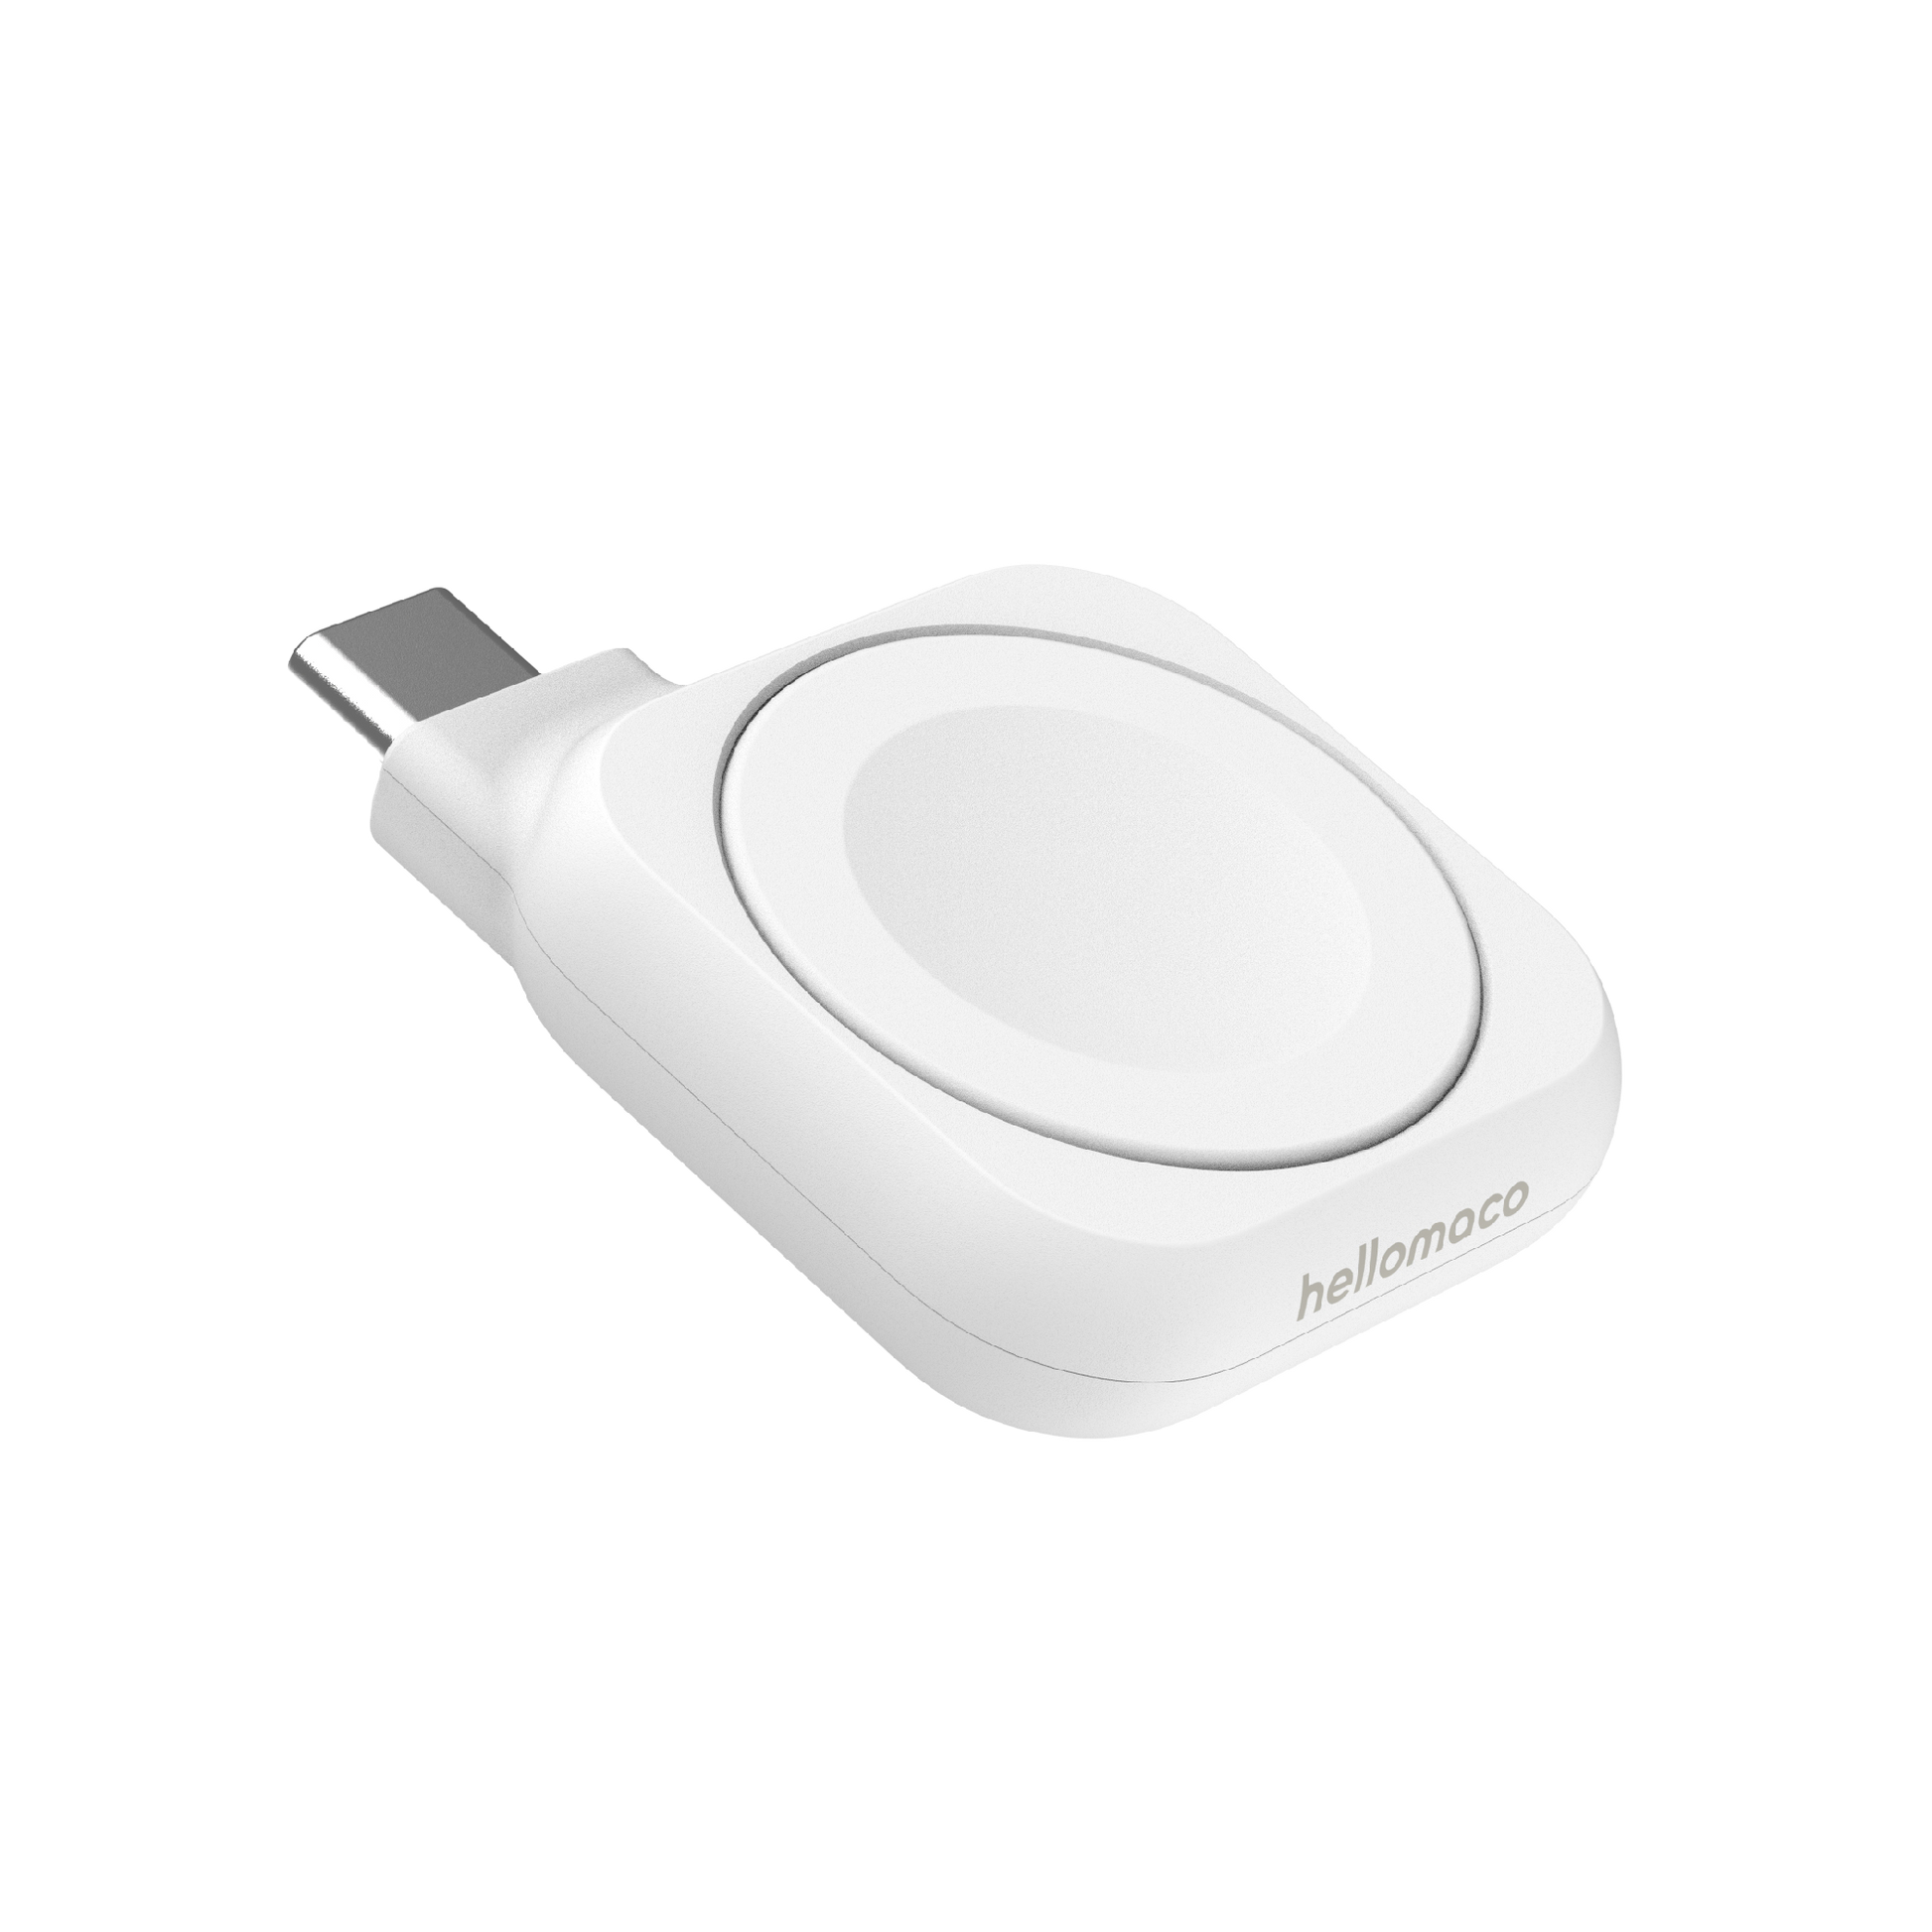  Apple MagSafe Duo - Wireless Charger with Fast